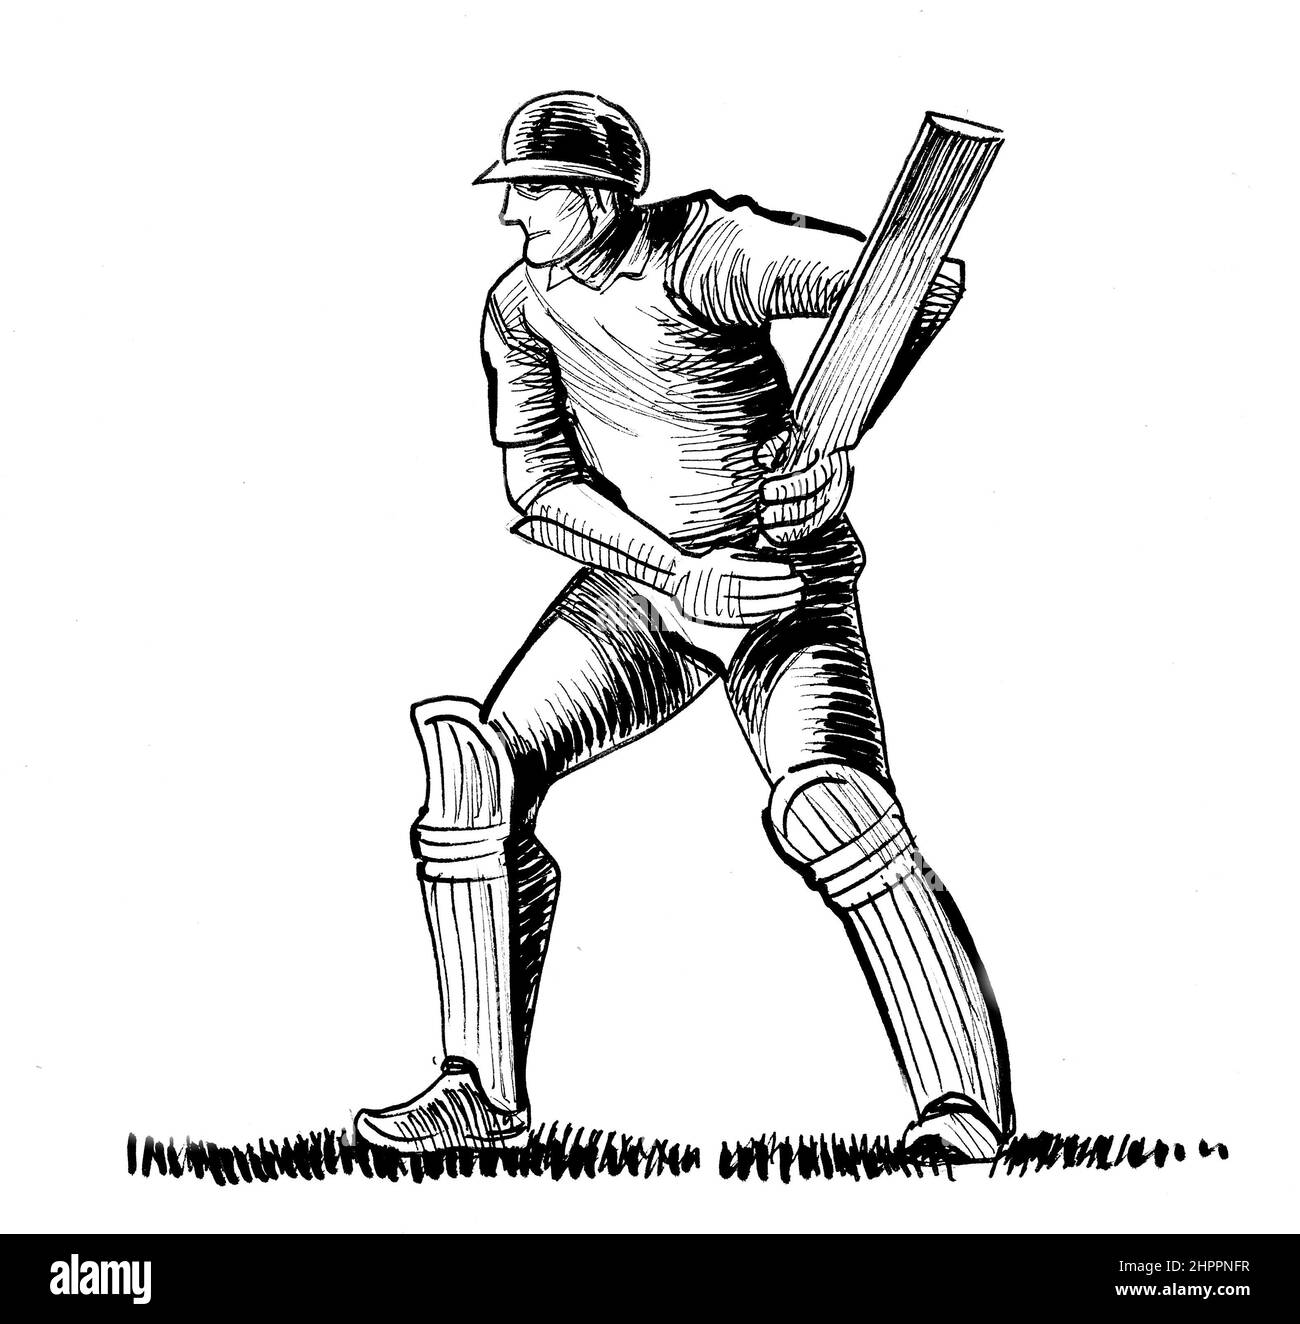 Cricket player. Ink black and white drawing Stock Photo